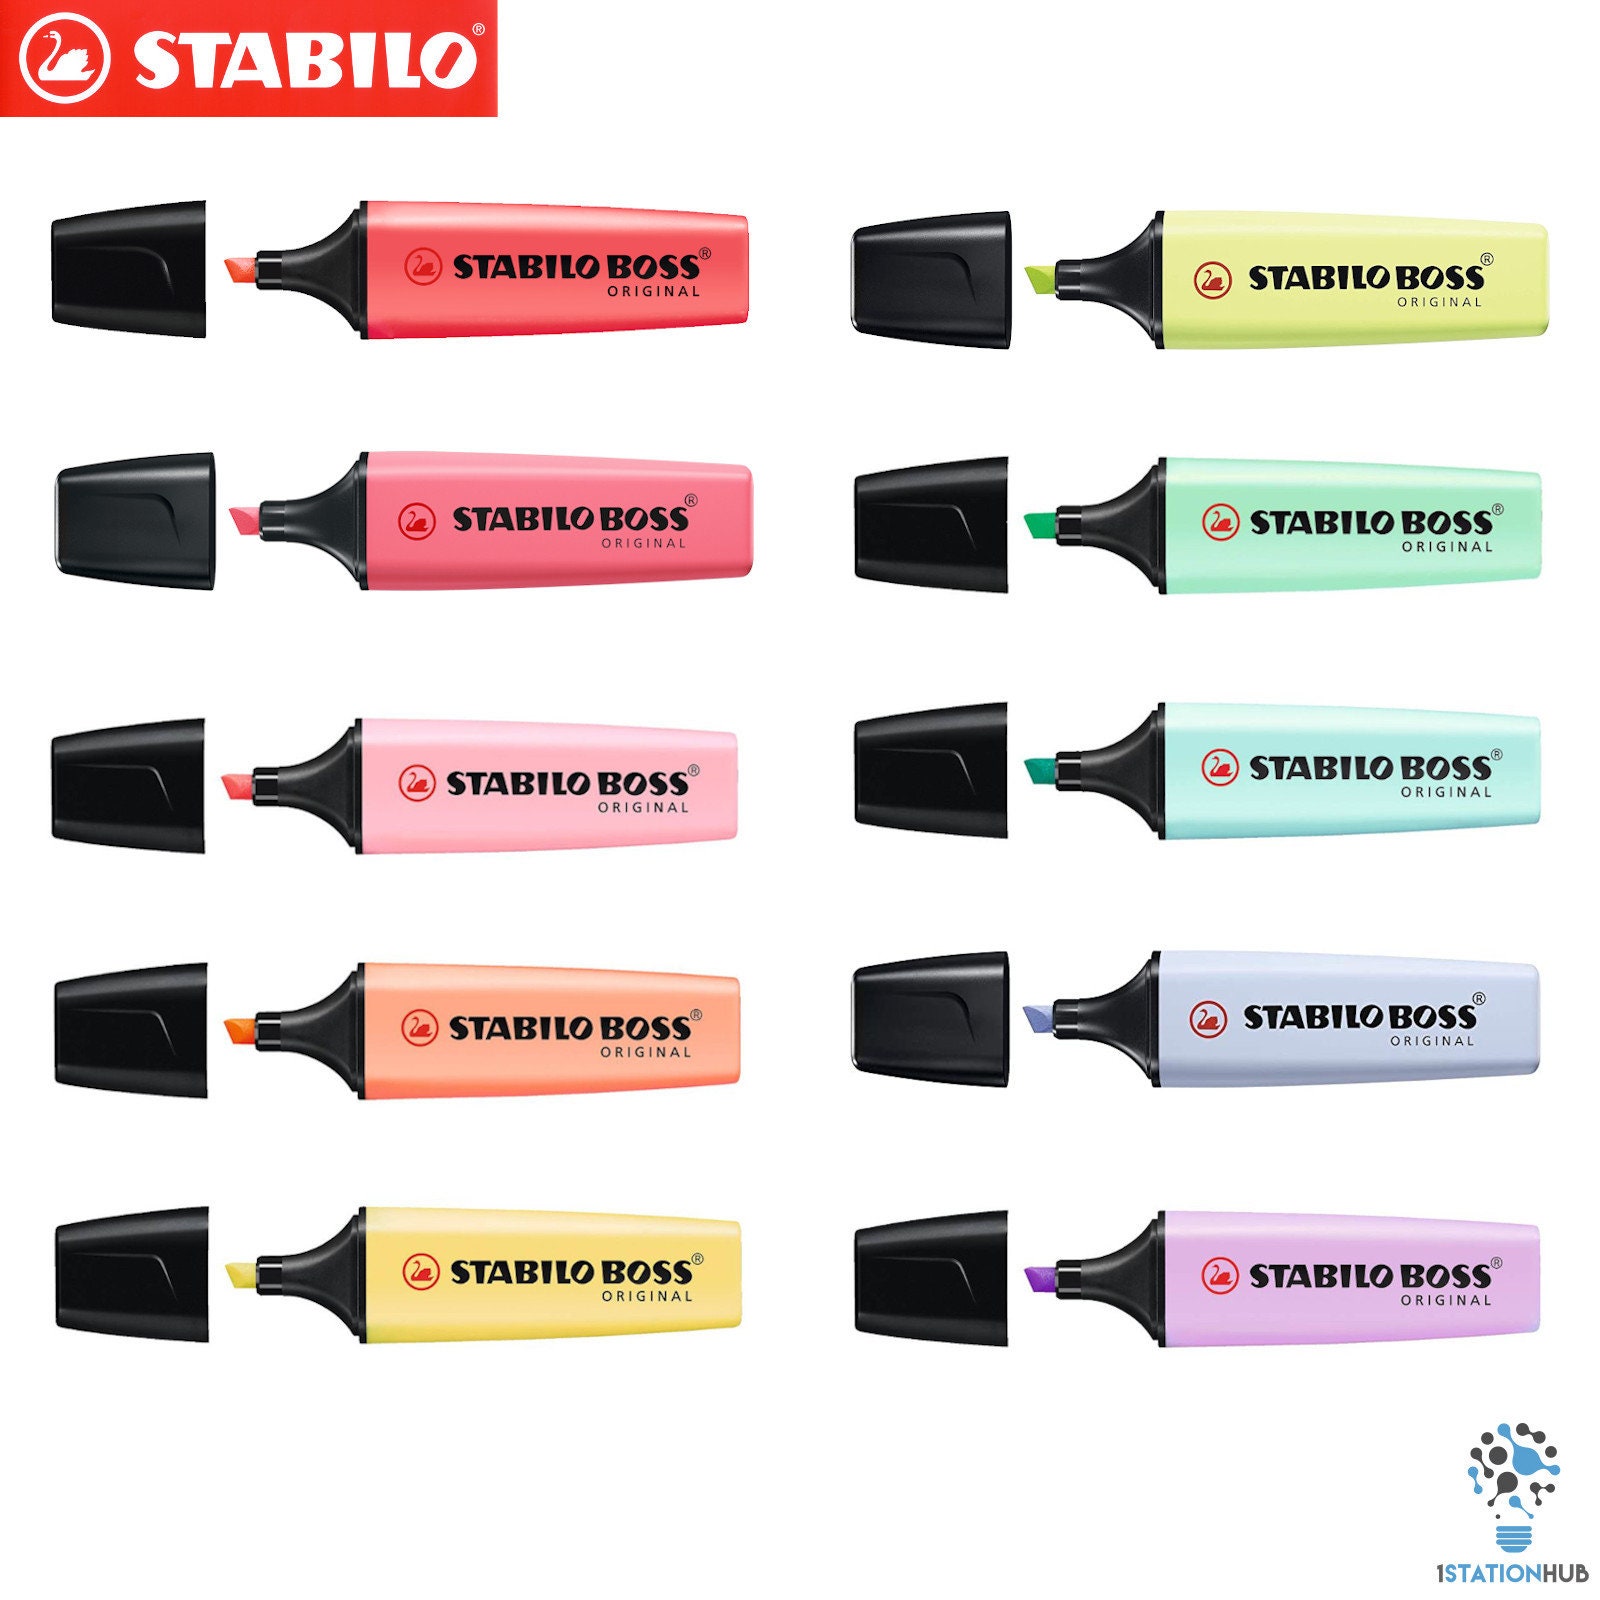 SynoTec - Marqueurs fluo pastel STABILO boss sont